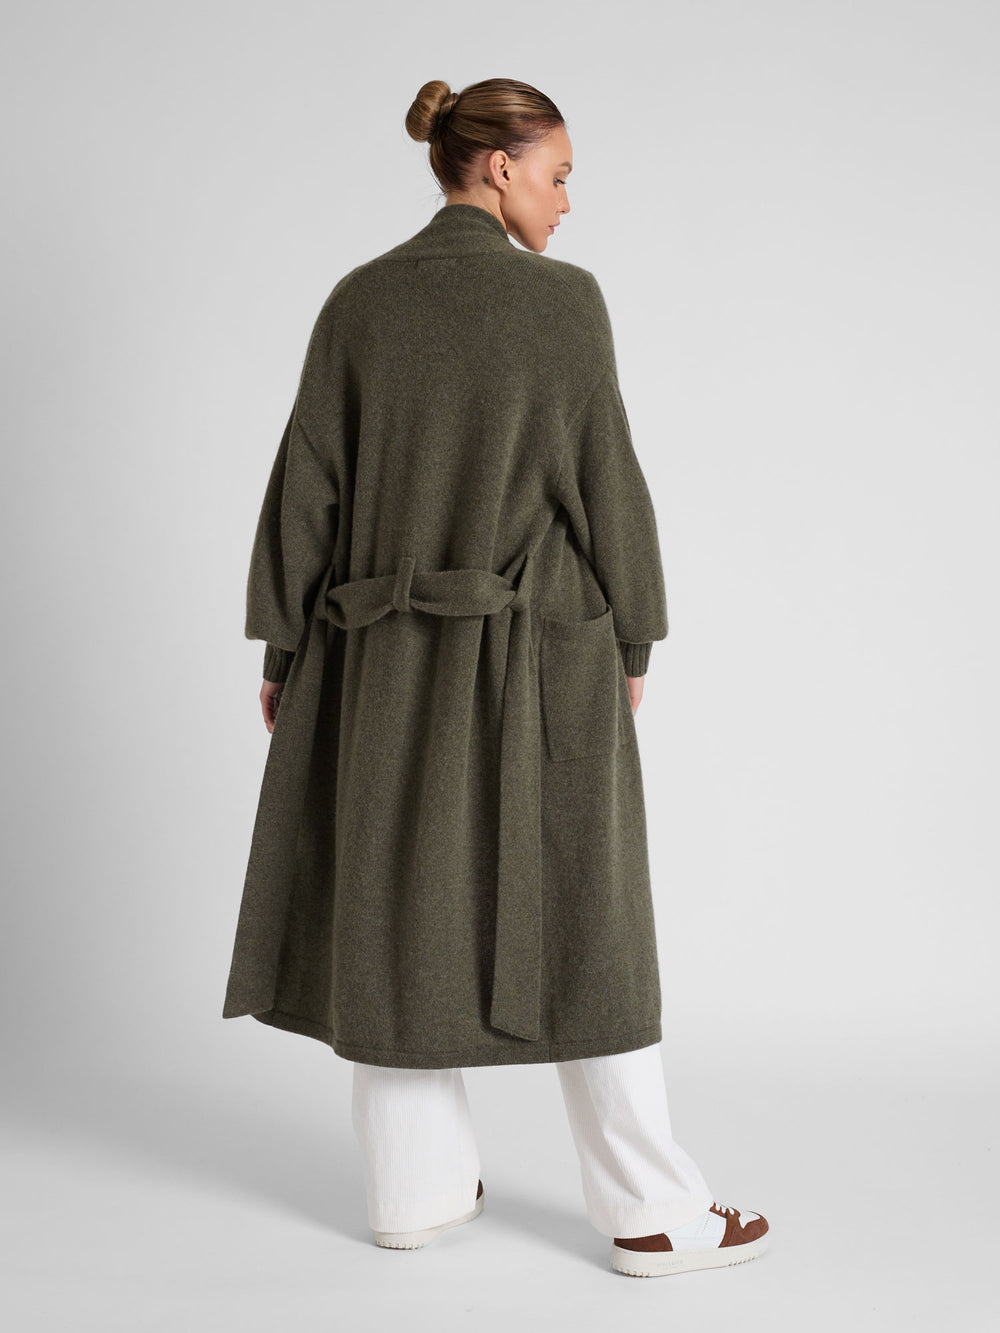 Cashmere coat "Trench" in 100% pure cashmere. Scandinavian design by Kashmina. Color: Army.